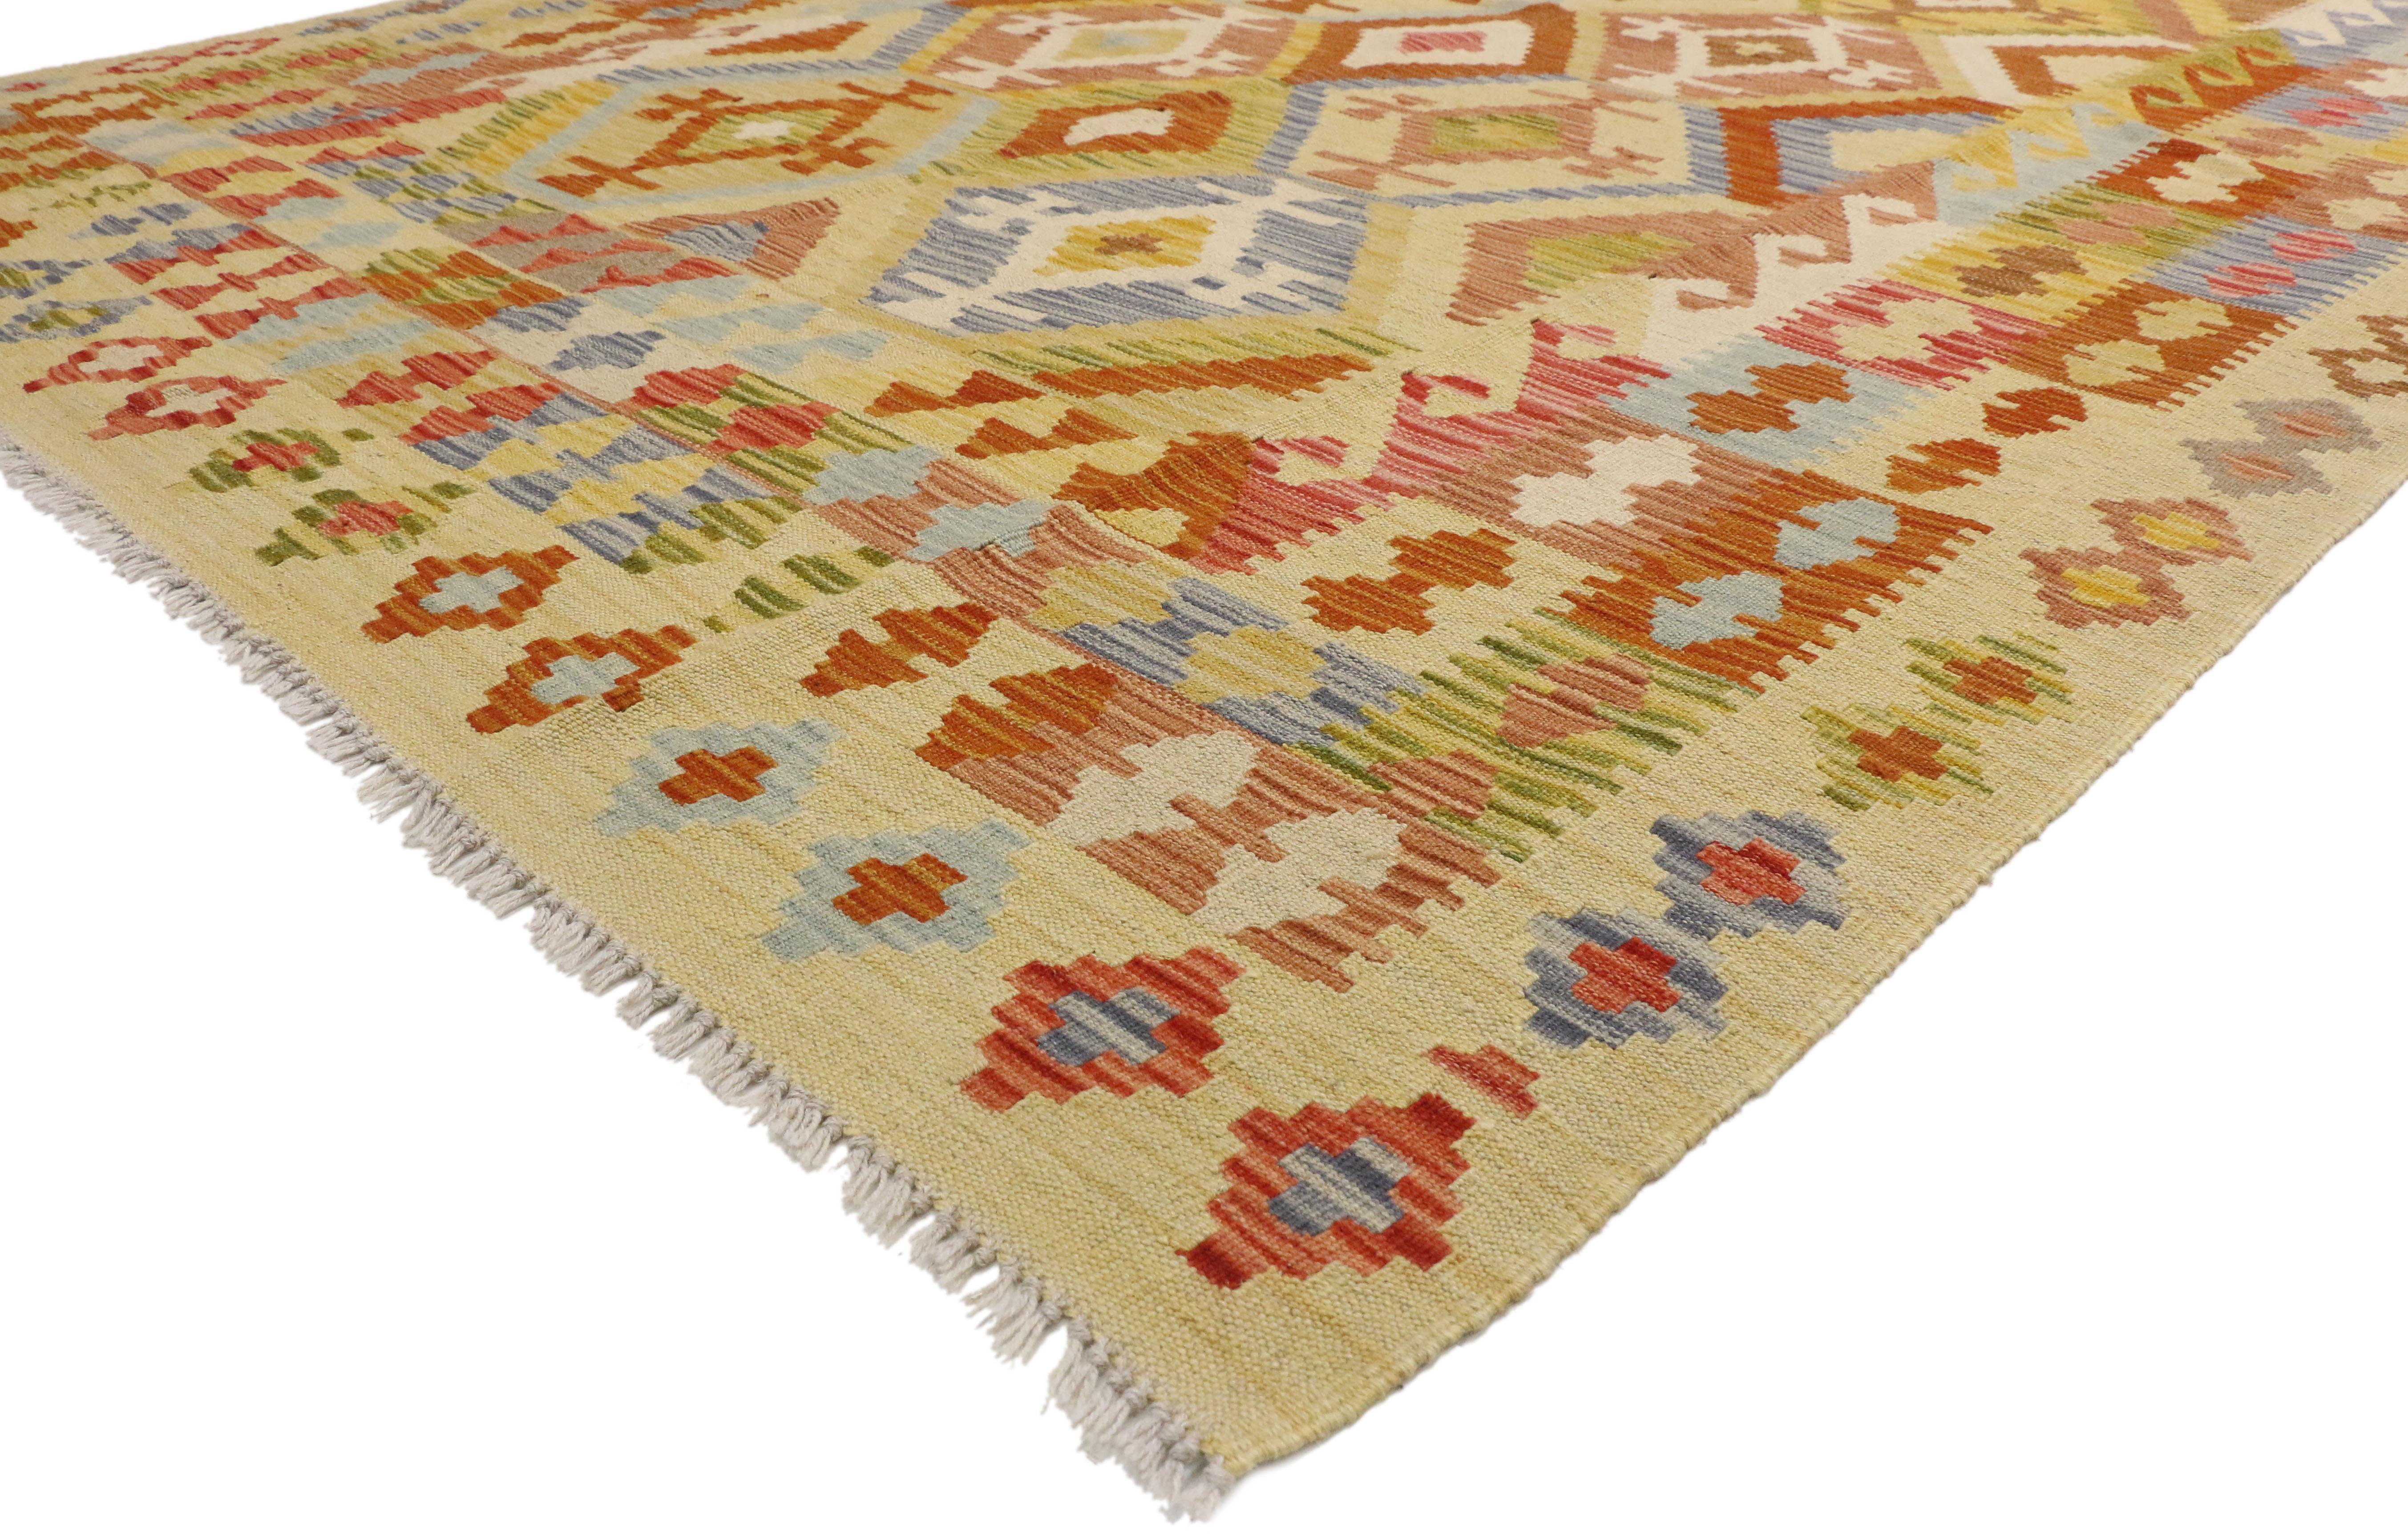 80132 vintage Afghani Kilim rug, 06’10 x 09’09. Full of tiny details and nomadic charm, this handwoven wool vintage Afghan kilim rug is a captivating vision of woven beauty. The eye-catching tribal design and vibrant earth-tone colors woven into